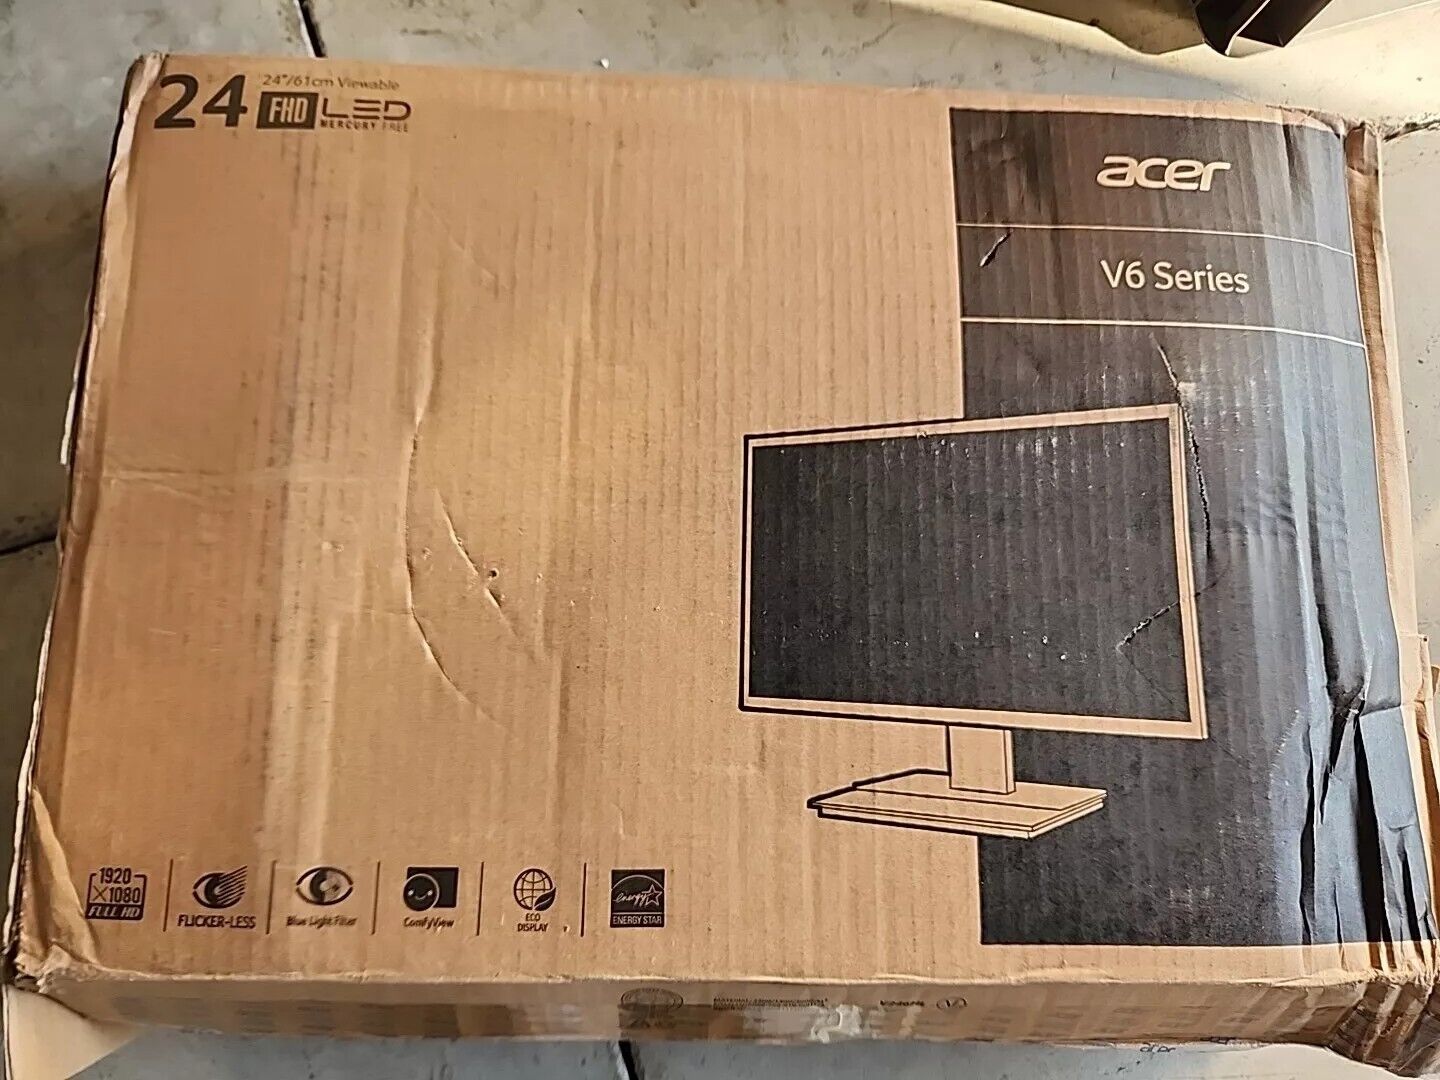 Acer V6 Series V246HL 24" LCD Monitor, Stand, Cords Warranty & Free Shipping